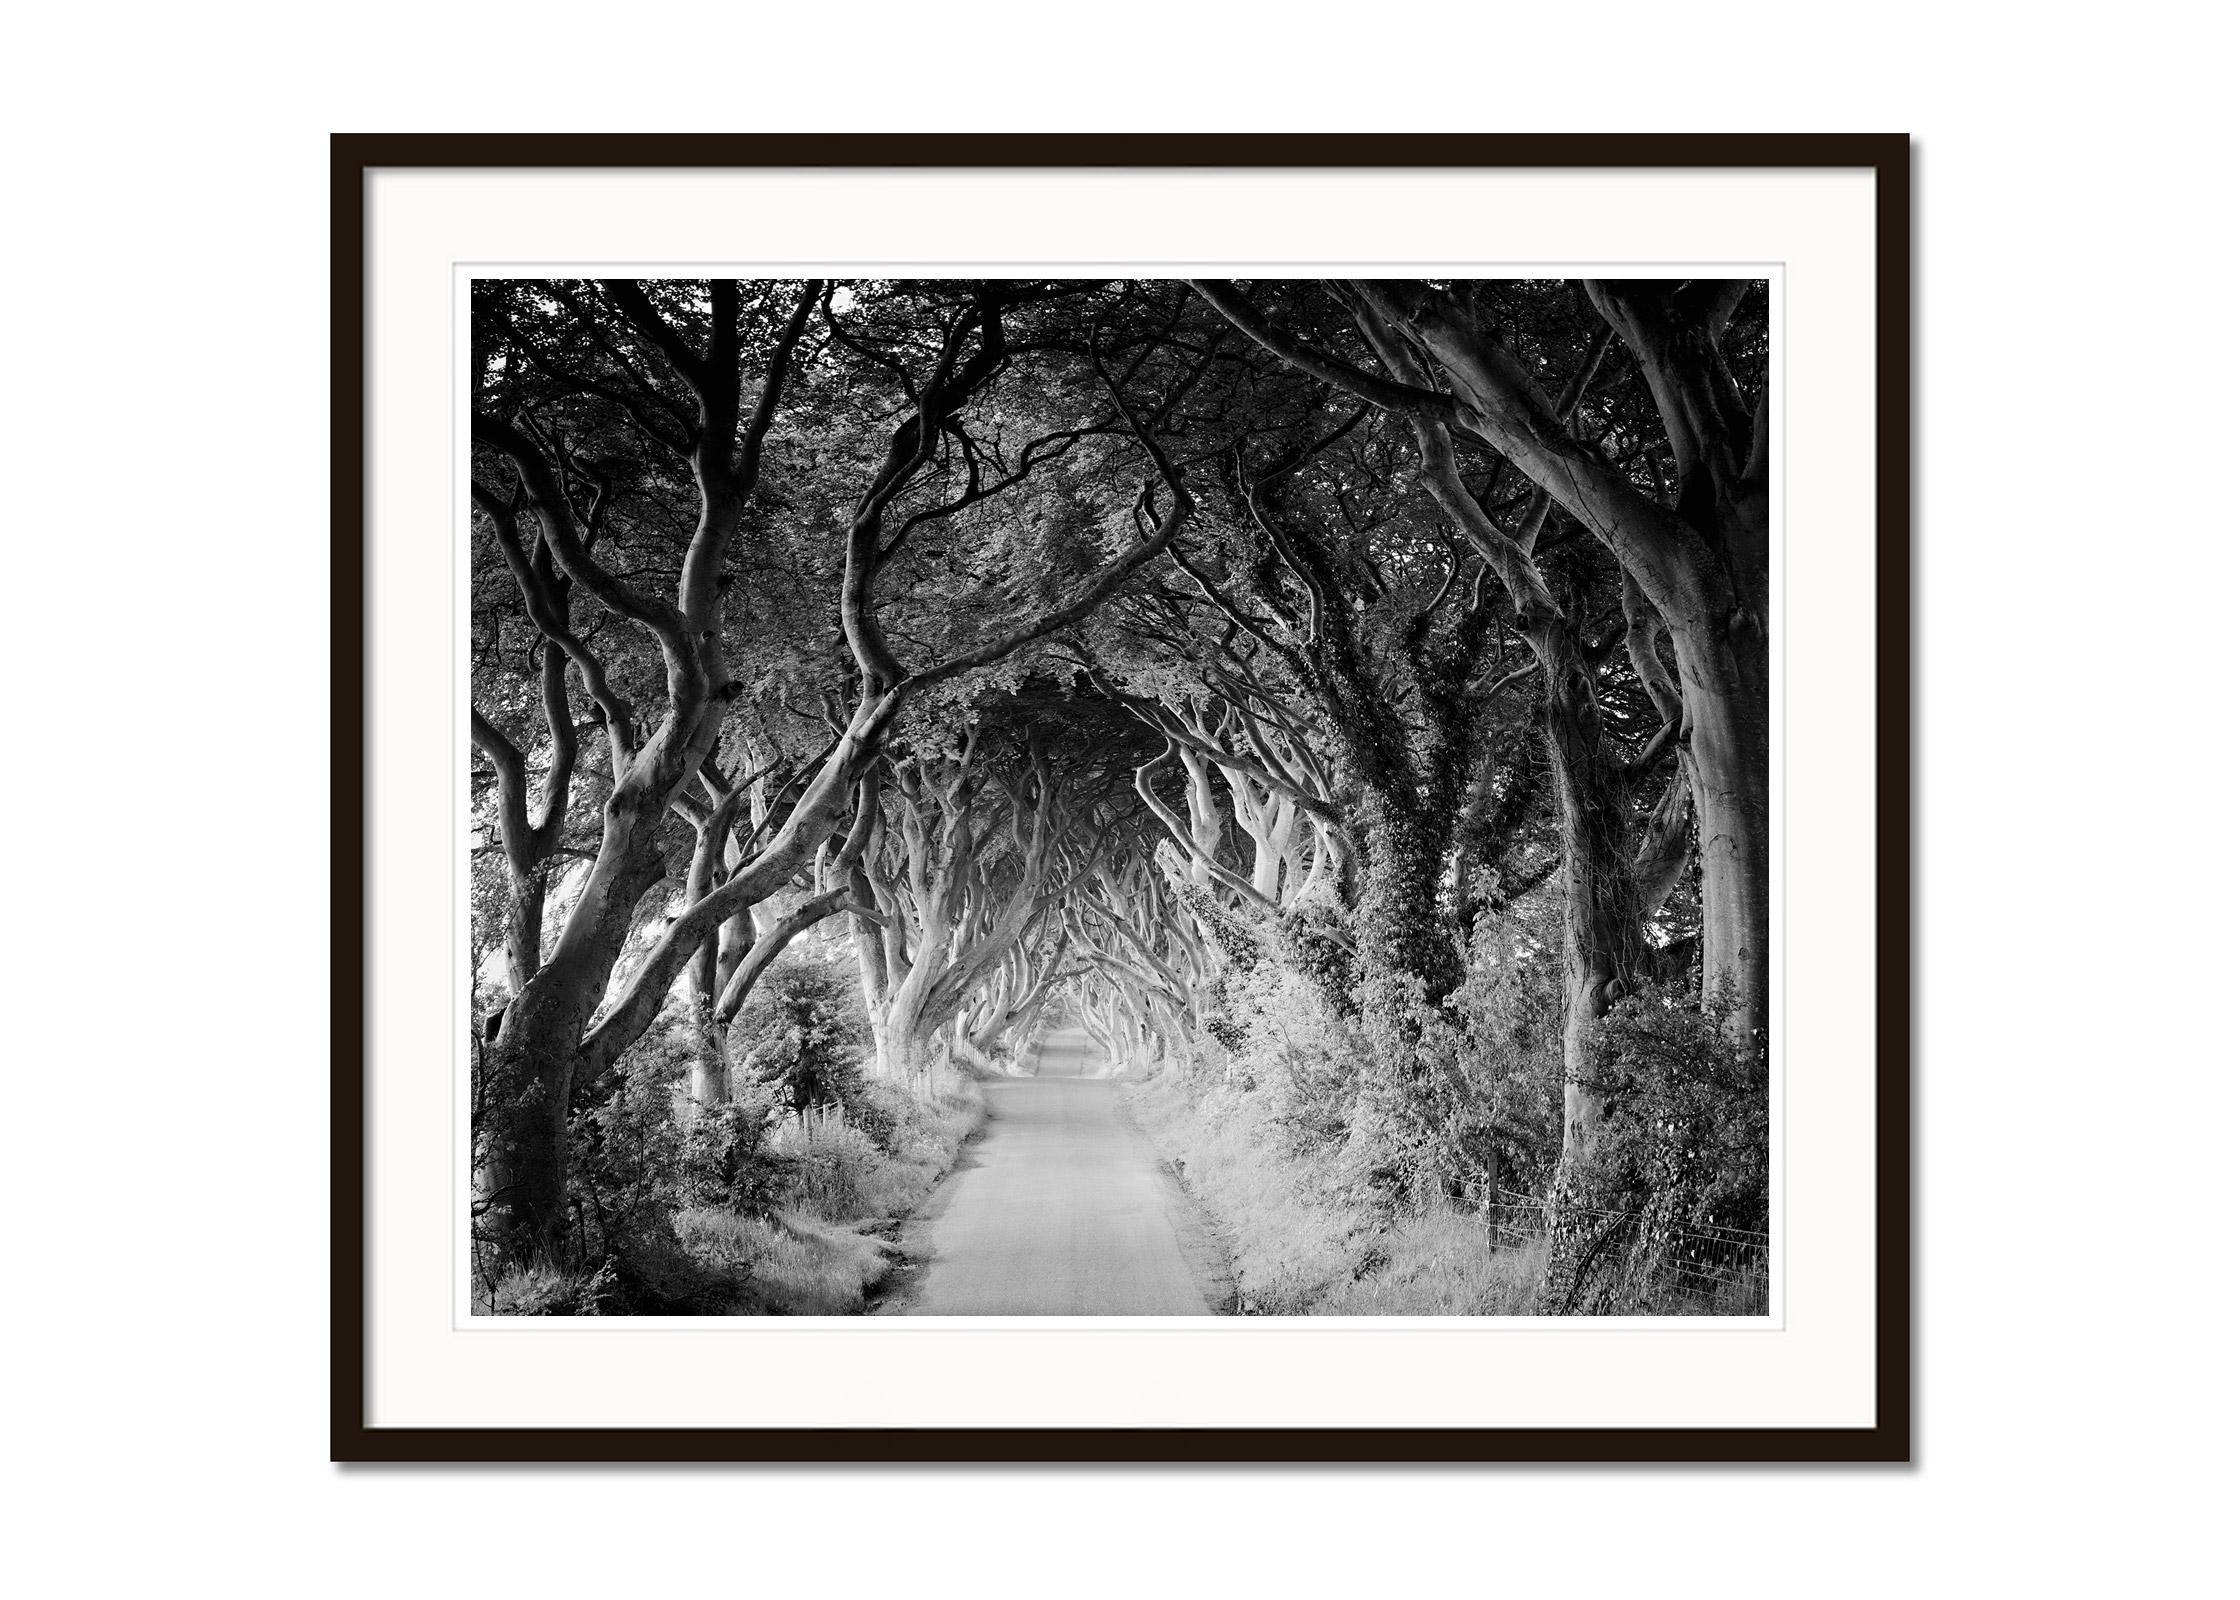 Dark Hedges, Beech, old Trees, black and white fine art landscape photography - Black Black and White Photograph by Gerald Berghammer